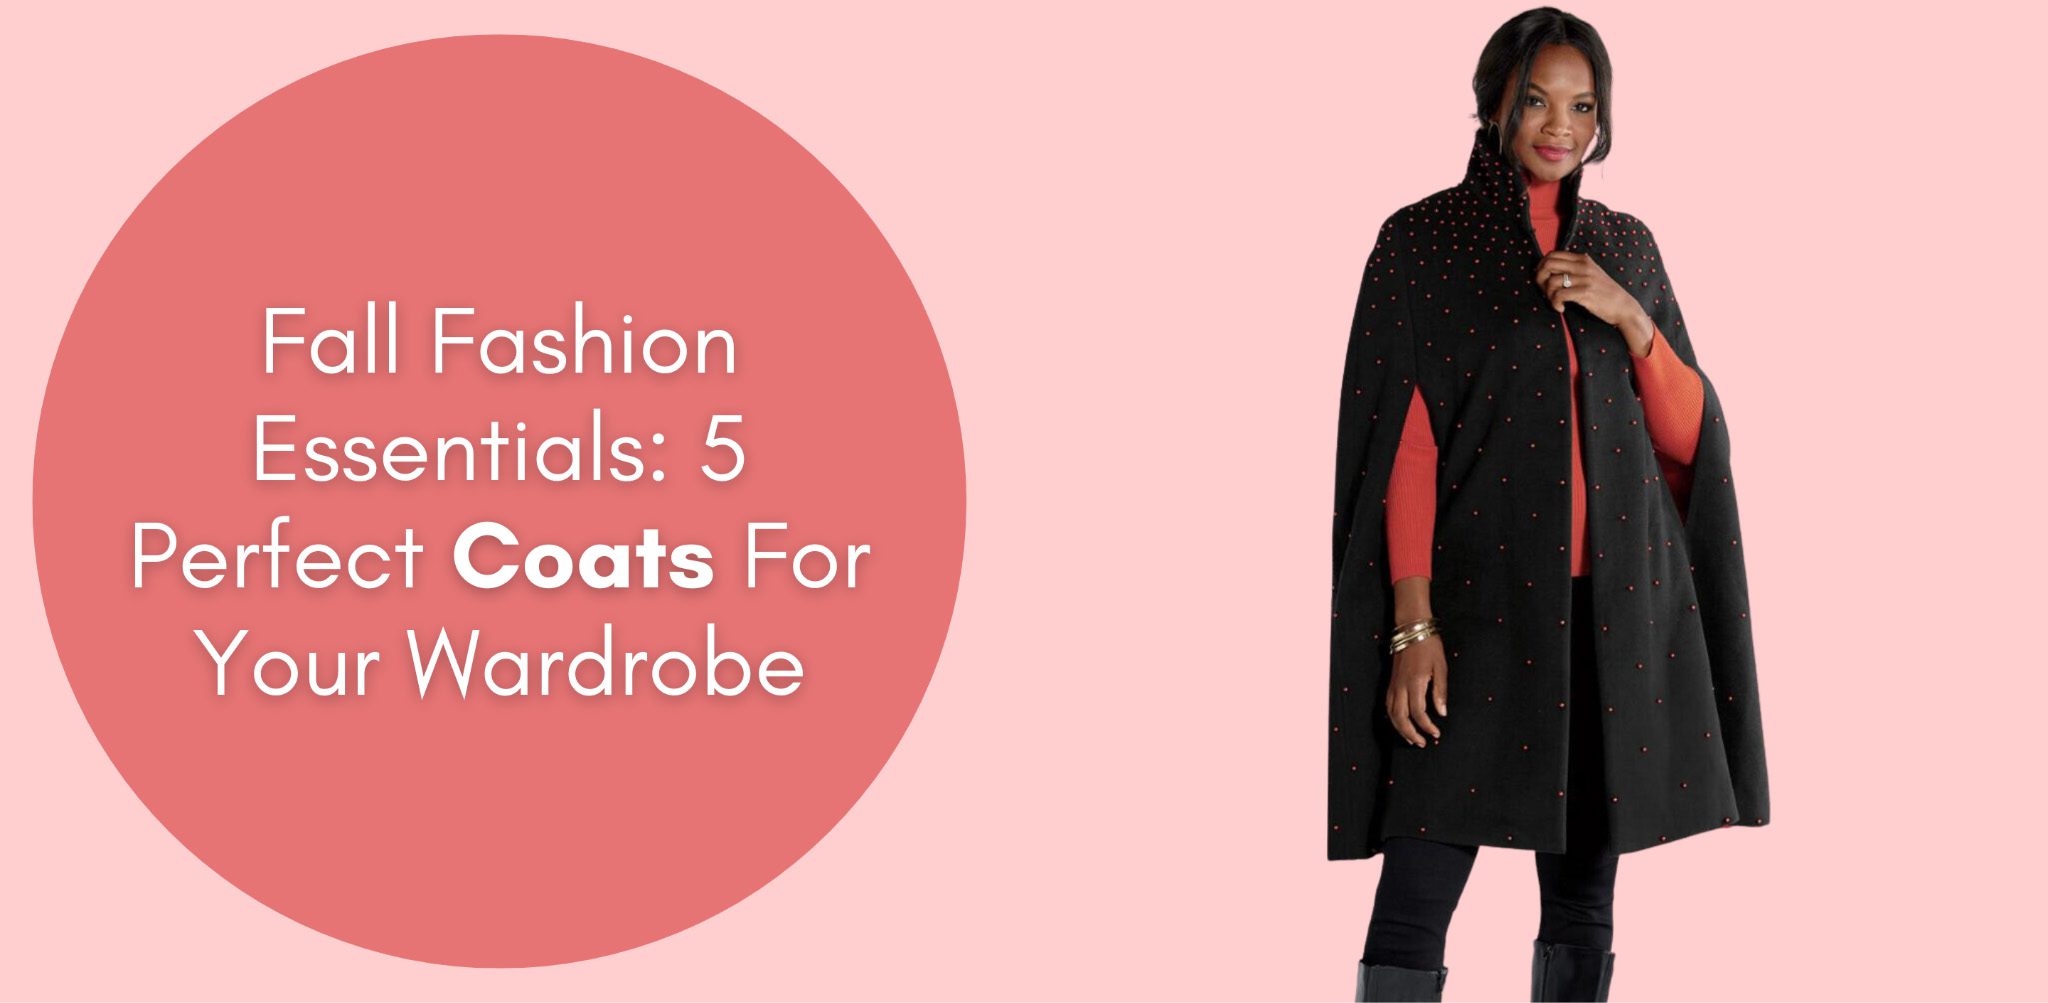 fall fashion essentials 5 perfect coats for your wardrobe